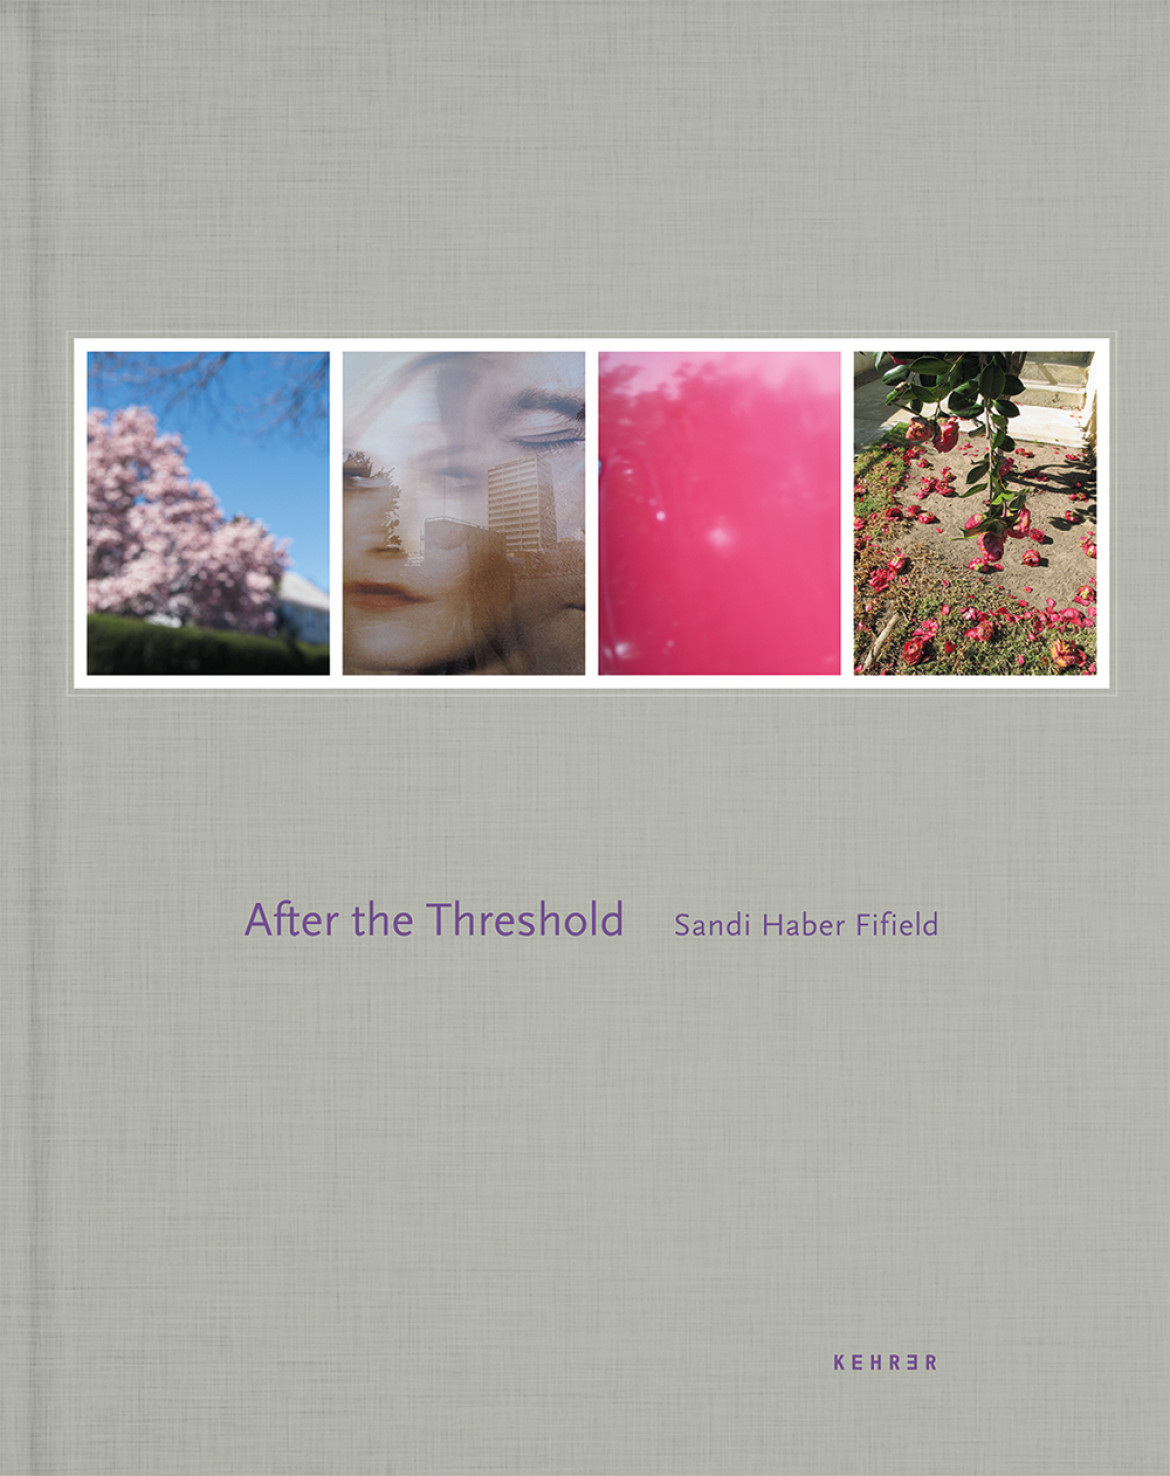 Sandi Haber Fifield “After the Threshold”